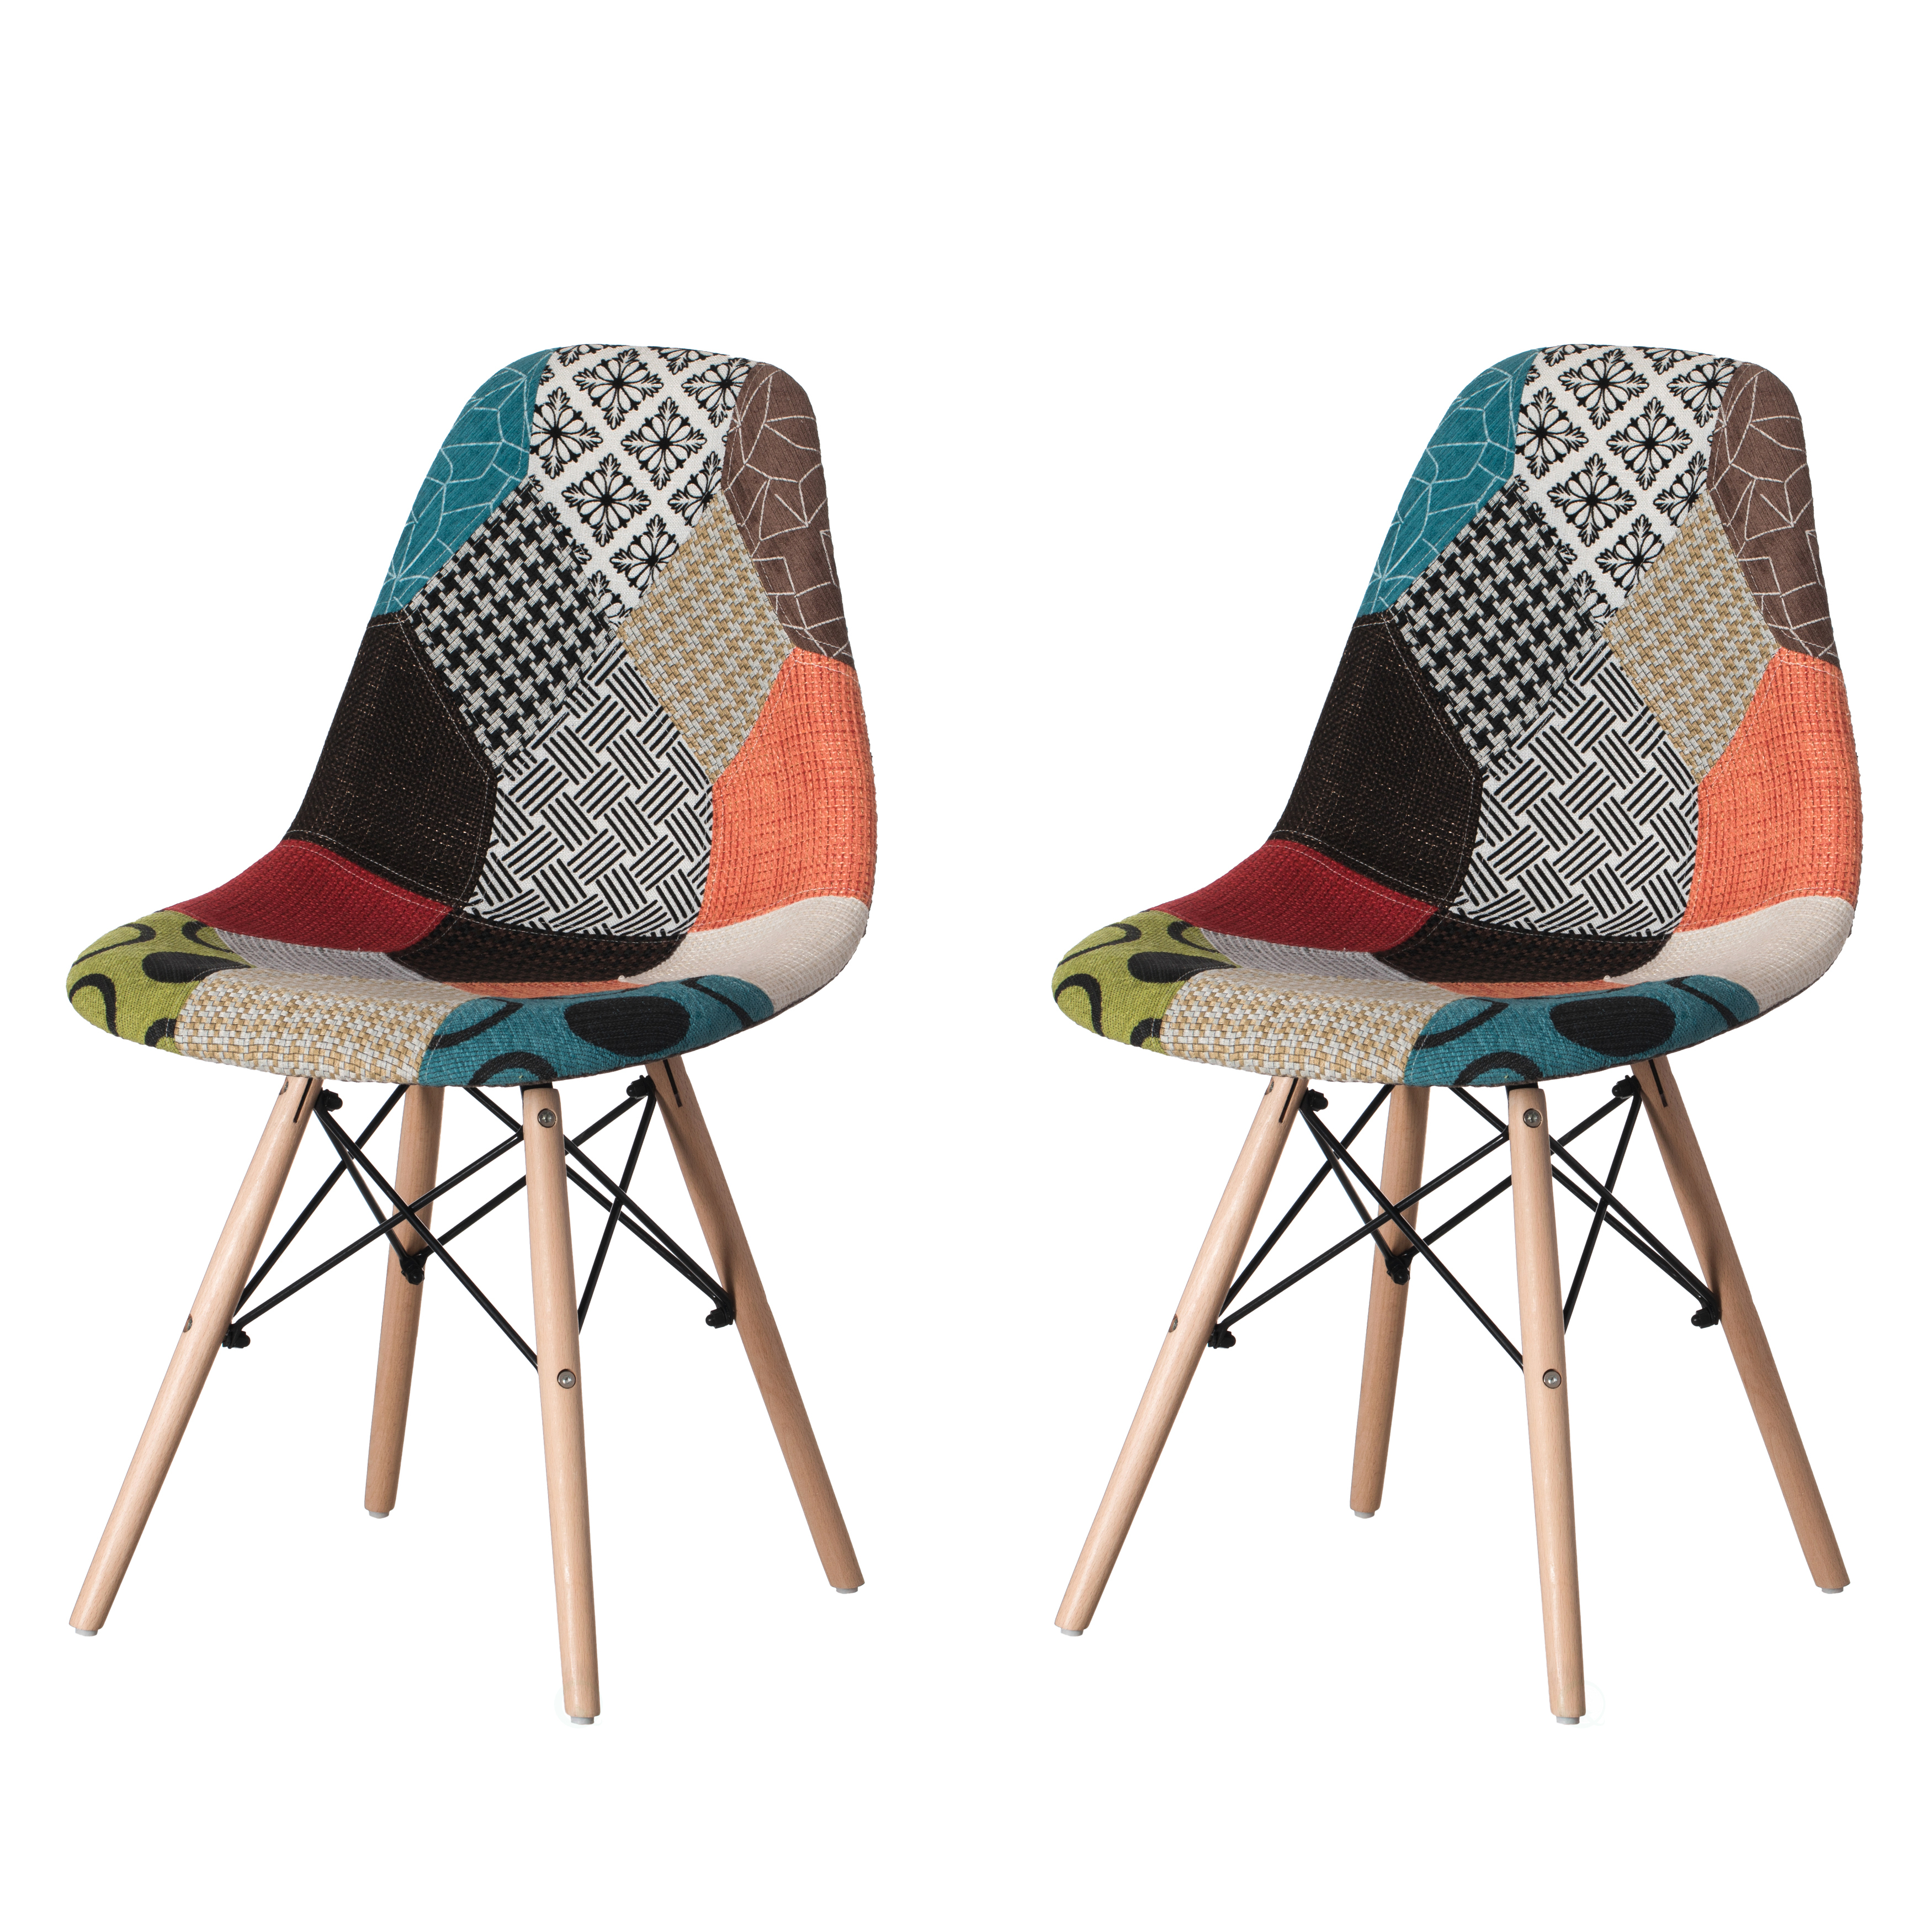 Modern Fabric Patchwork Chair With Wooden Legs For Kitchen, Dining Room, Entryway, Living Room - Set Of 2